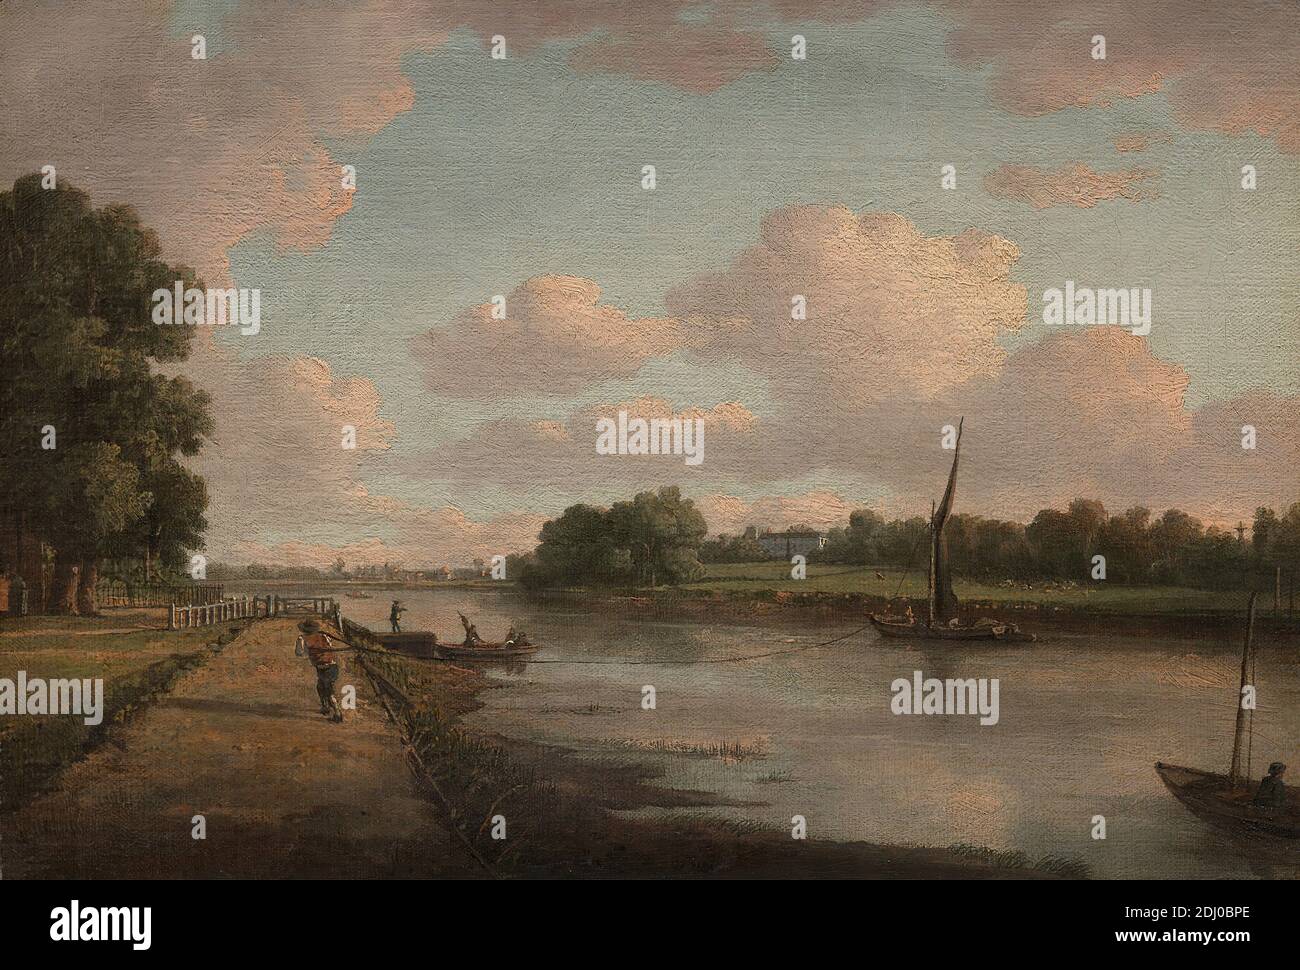 View on the River Thames at Richmond, William Marlow, 1740–1813, British, ca. 1776, Oil on canvas, Support (PTG): 13 1/4 x 19 1/4 inches (33.7 x 48.9 cm), costume, dock, fences, field, landscape, man, park (grounds), path, pulling, river, rope, sailboats, sheep, England, Greater London, North Yorkshire, Richmond, Thames, United Kingdom, Yorkshire Stock Photo